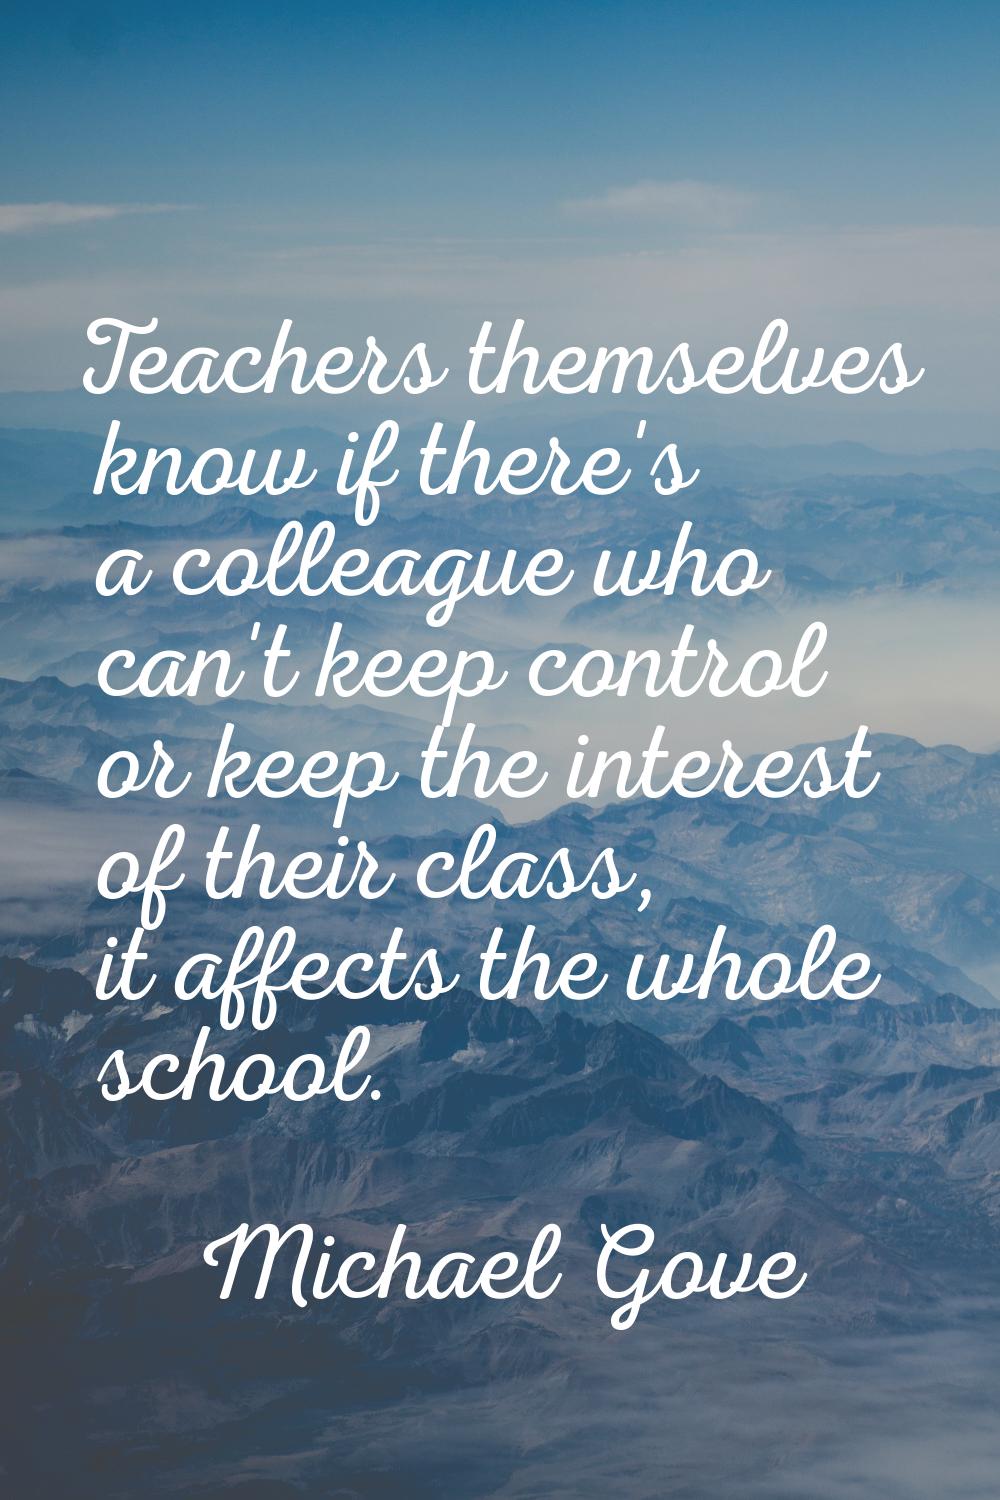 Teachers themselves know if there's a colleague who can't keep control or keep the interest of thei